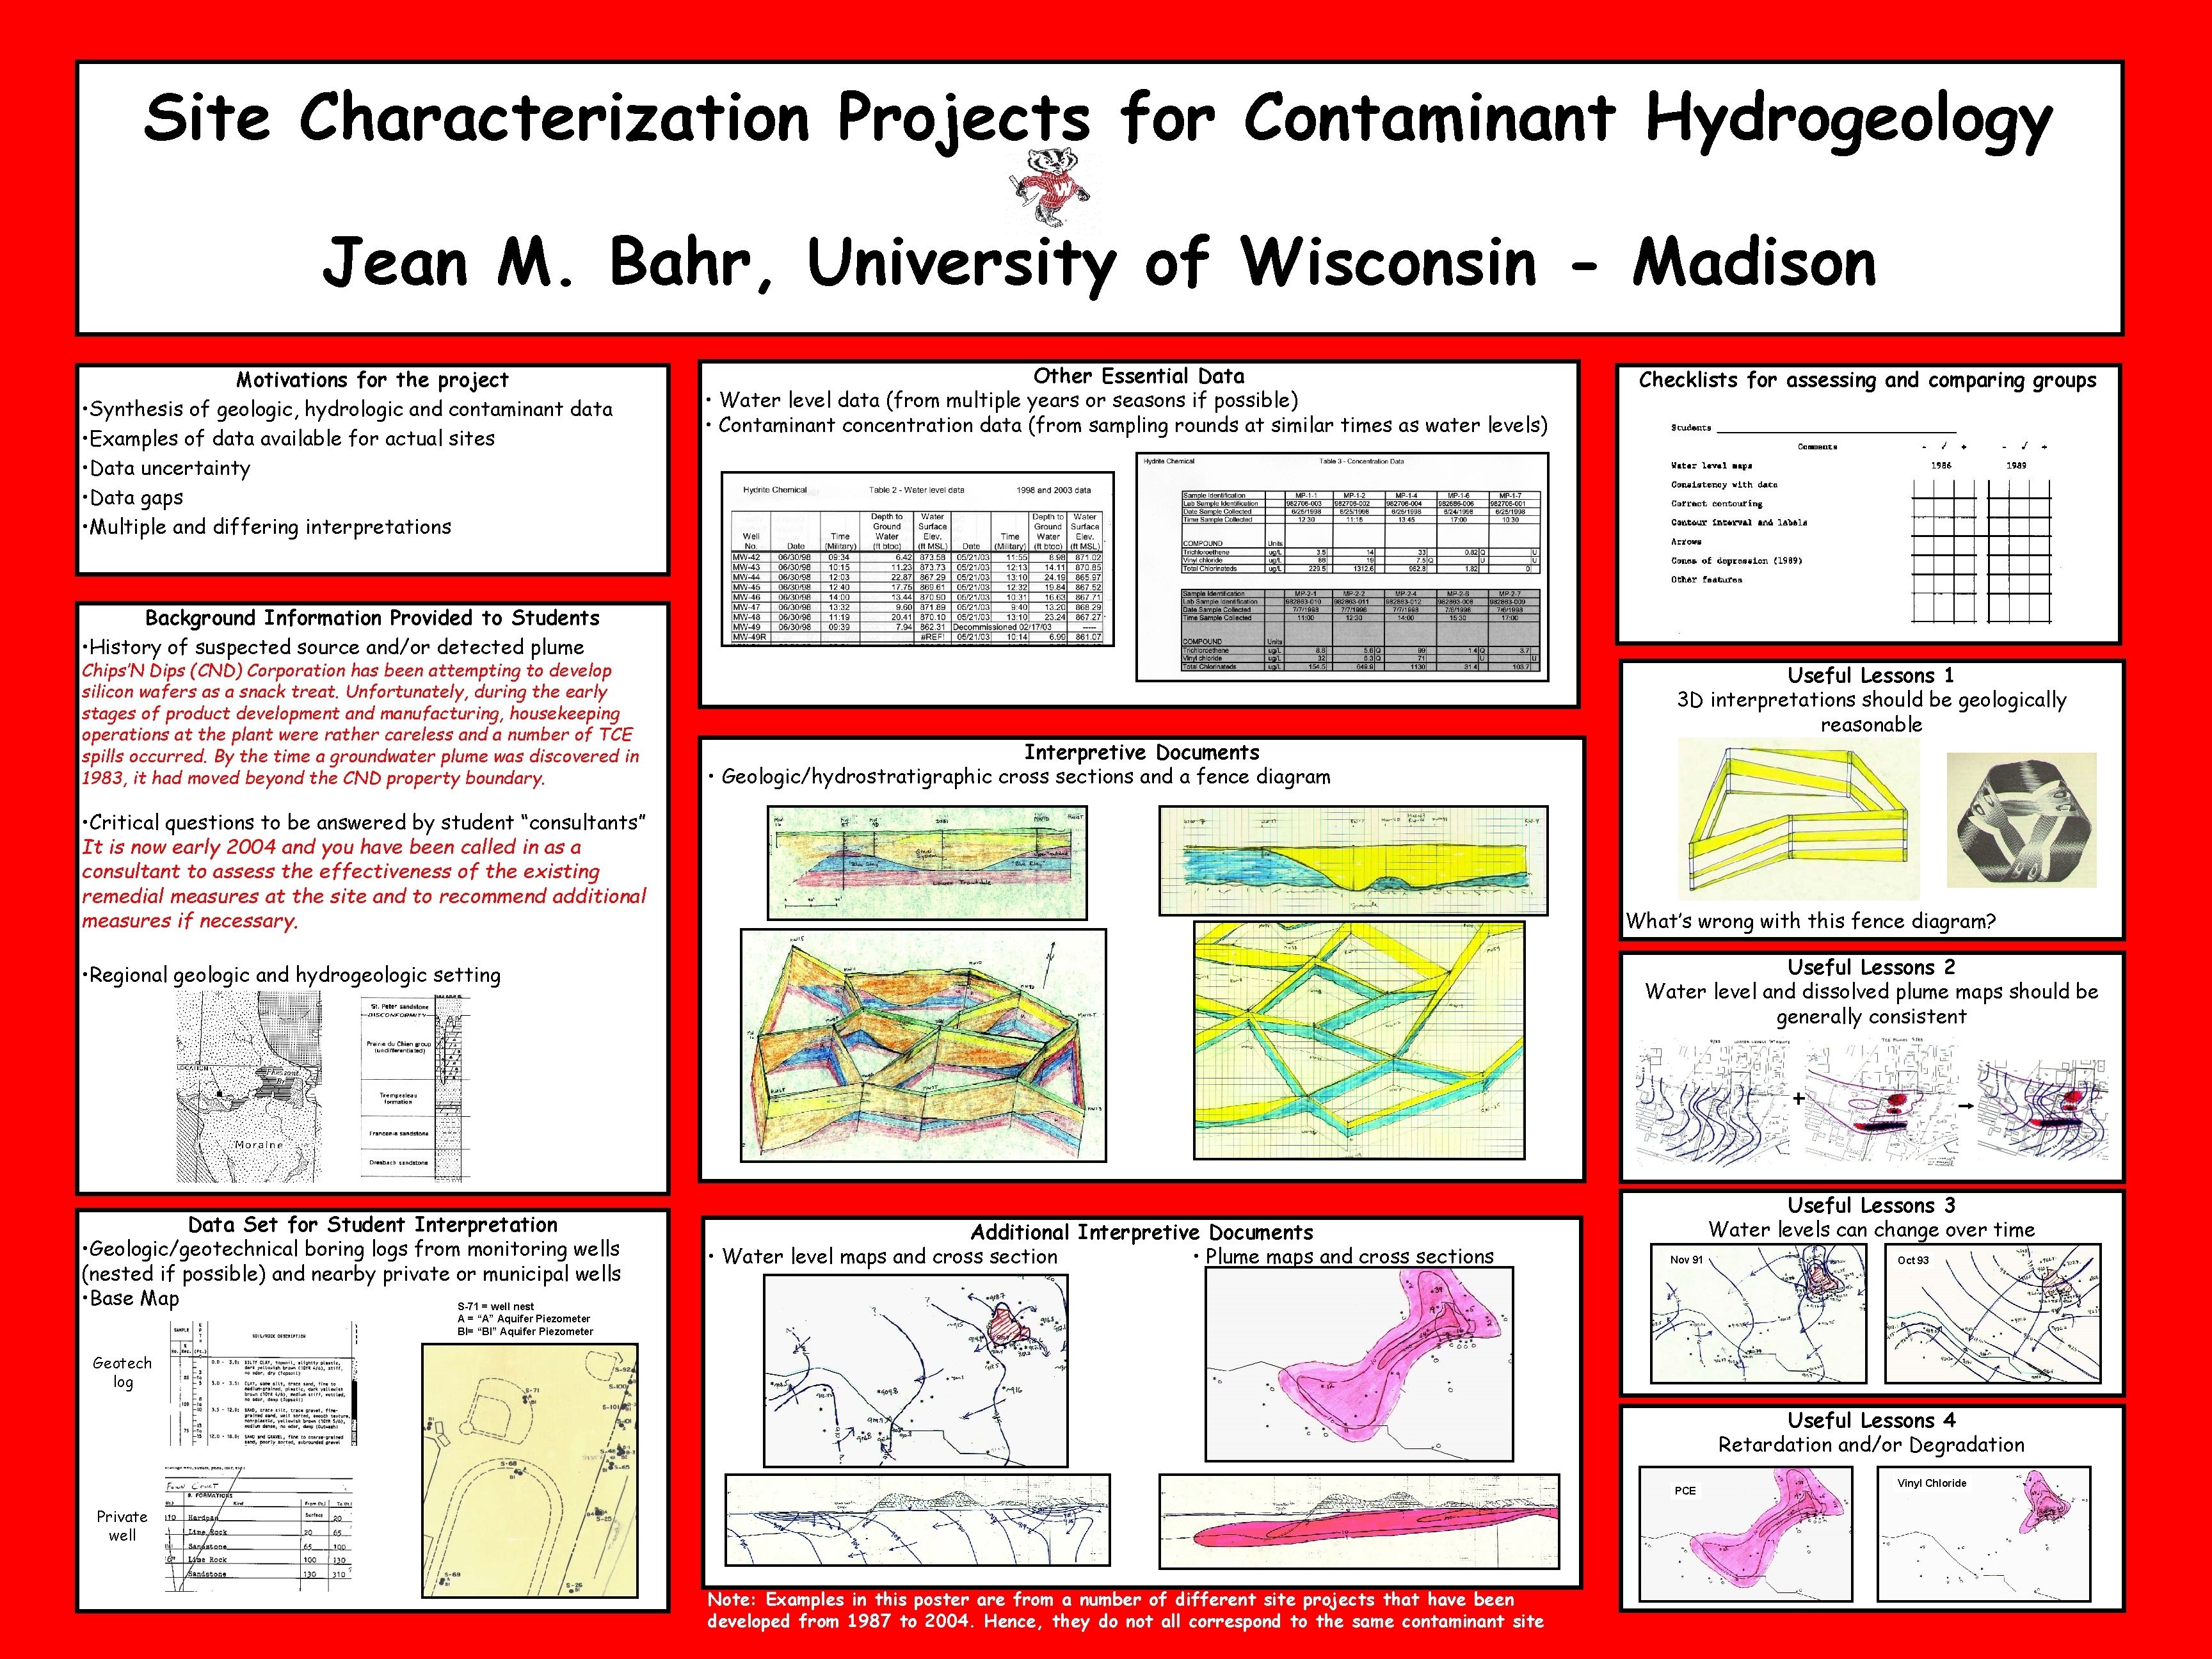 Site Characterization Projects for Contaminant Hydrogeology Jean M. Bahr, University of Wisconsin - Madison